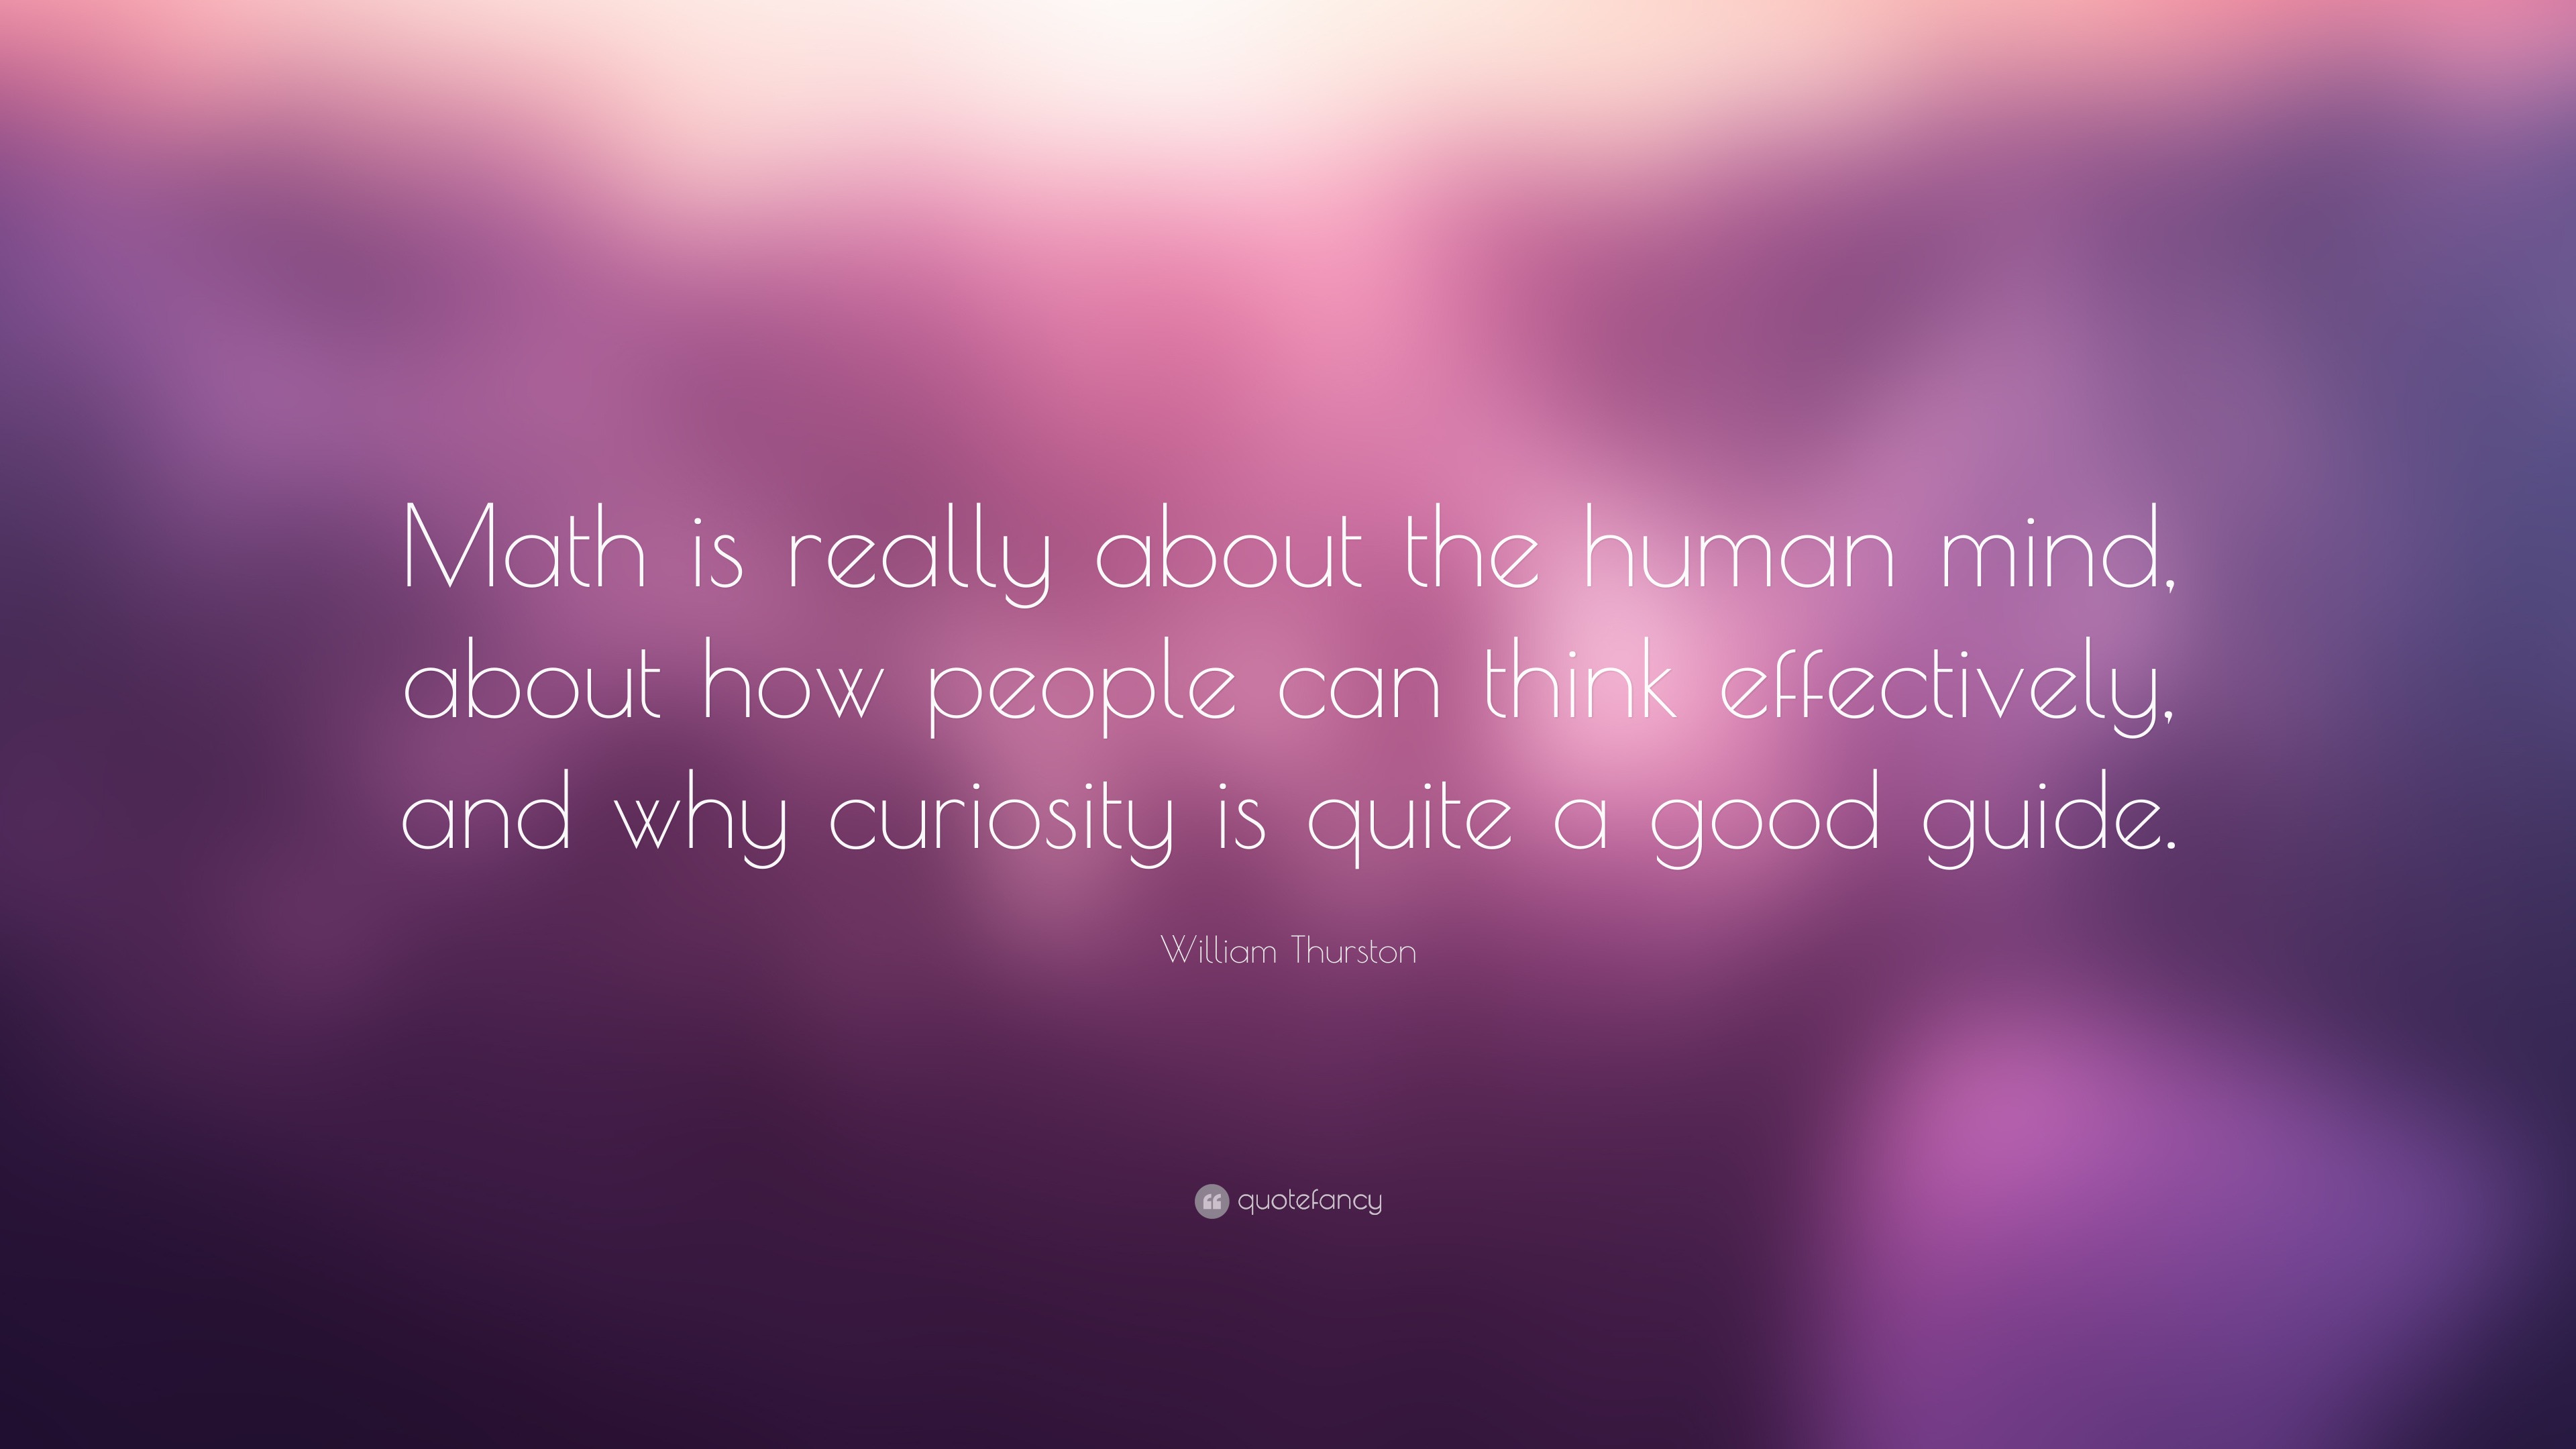 William Thurston Quote: “Math is really about the human mind, about how  people can think effectively,